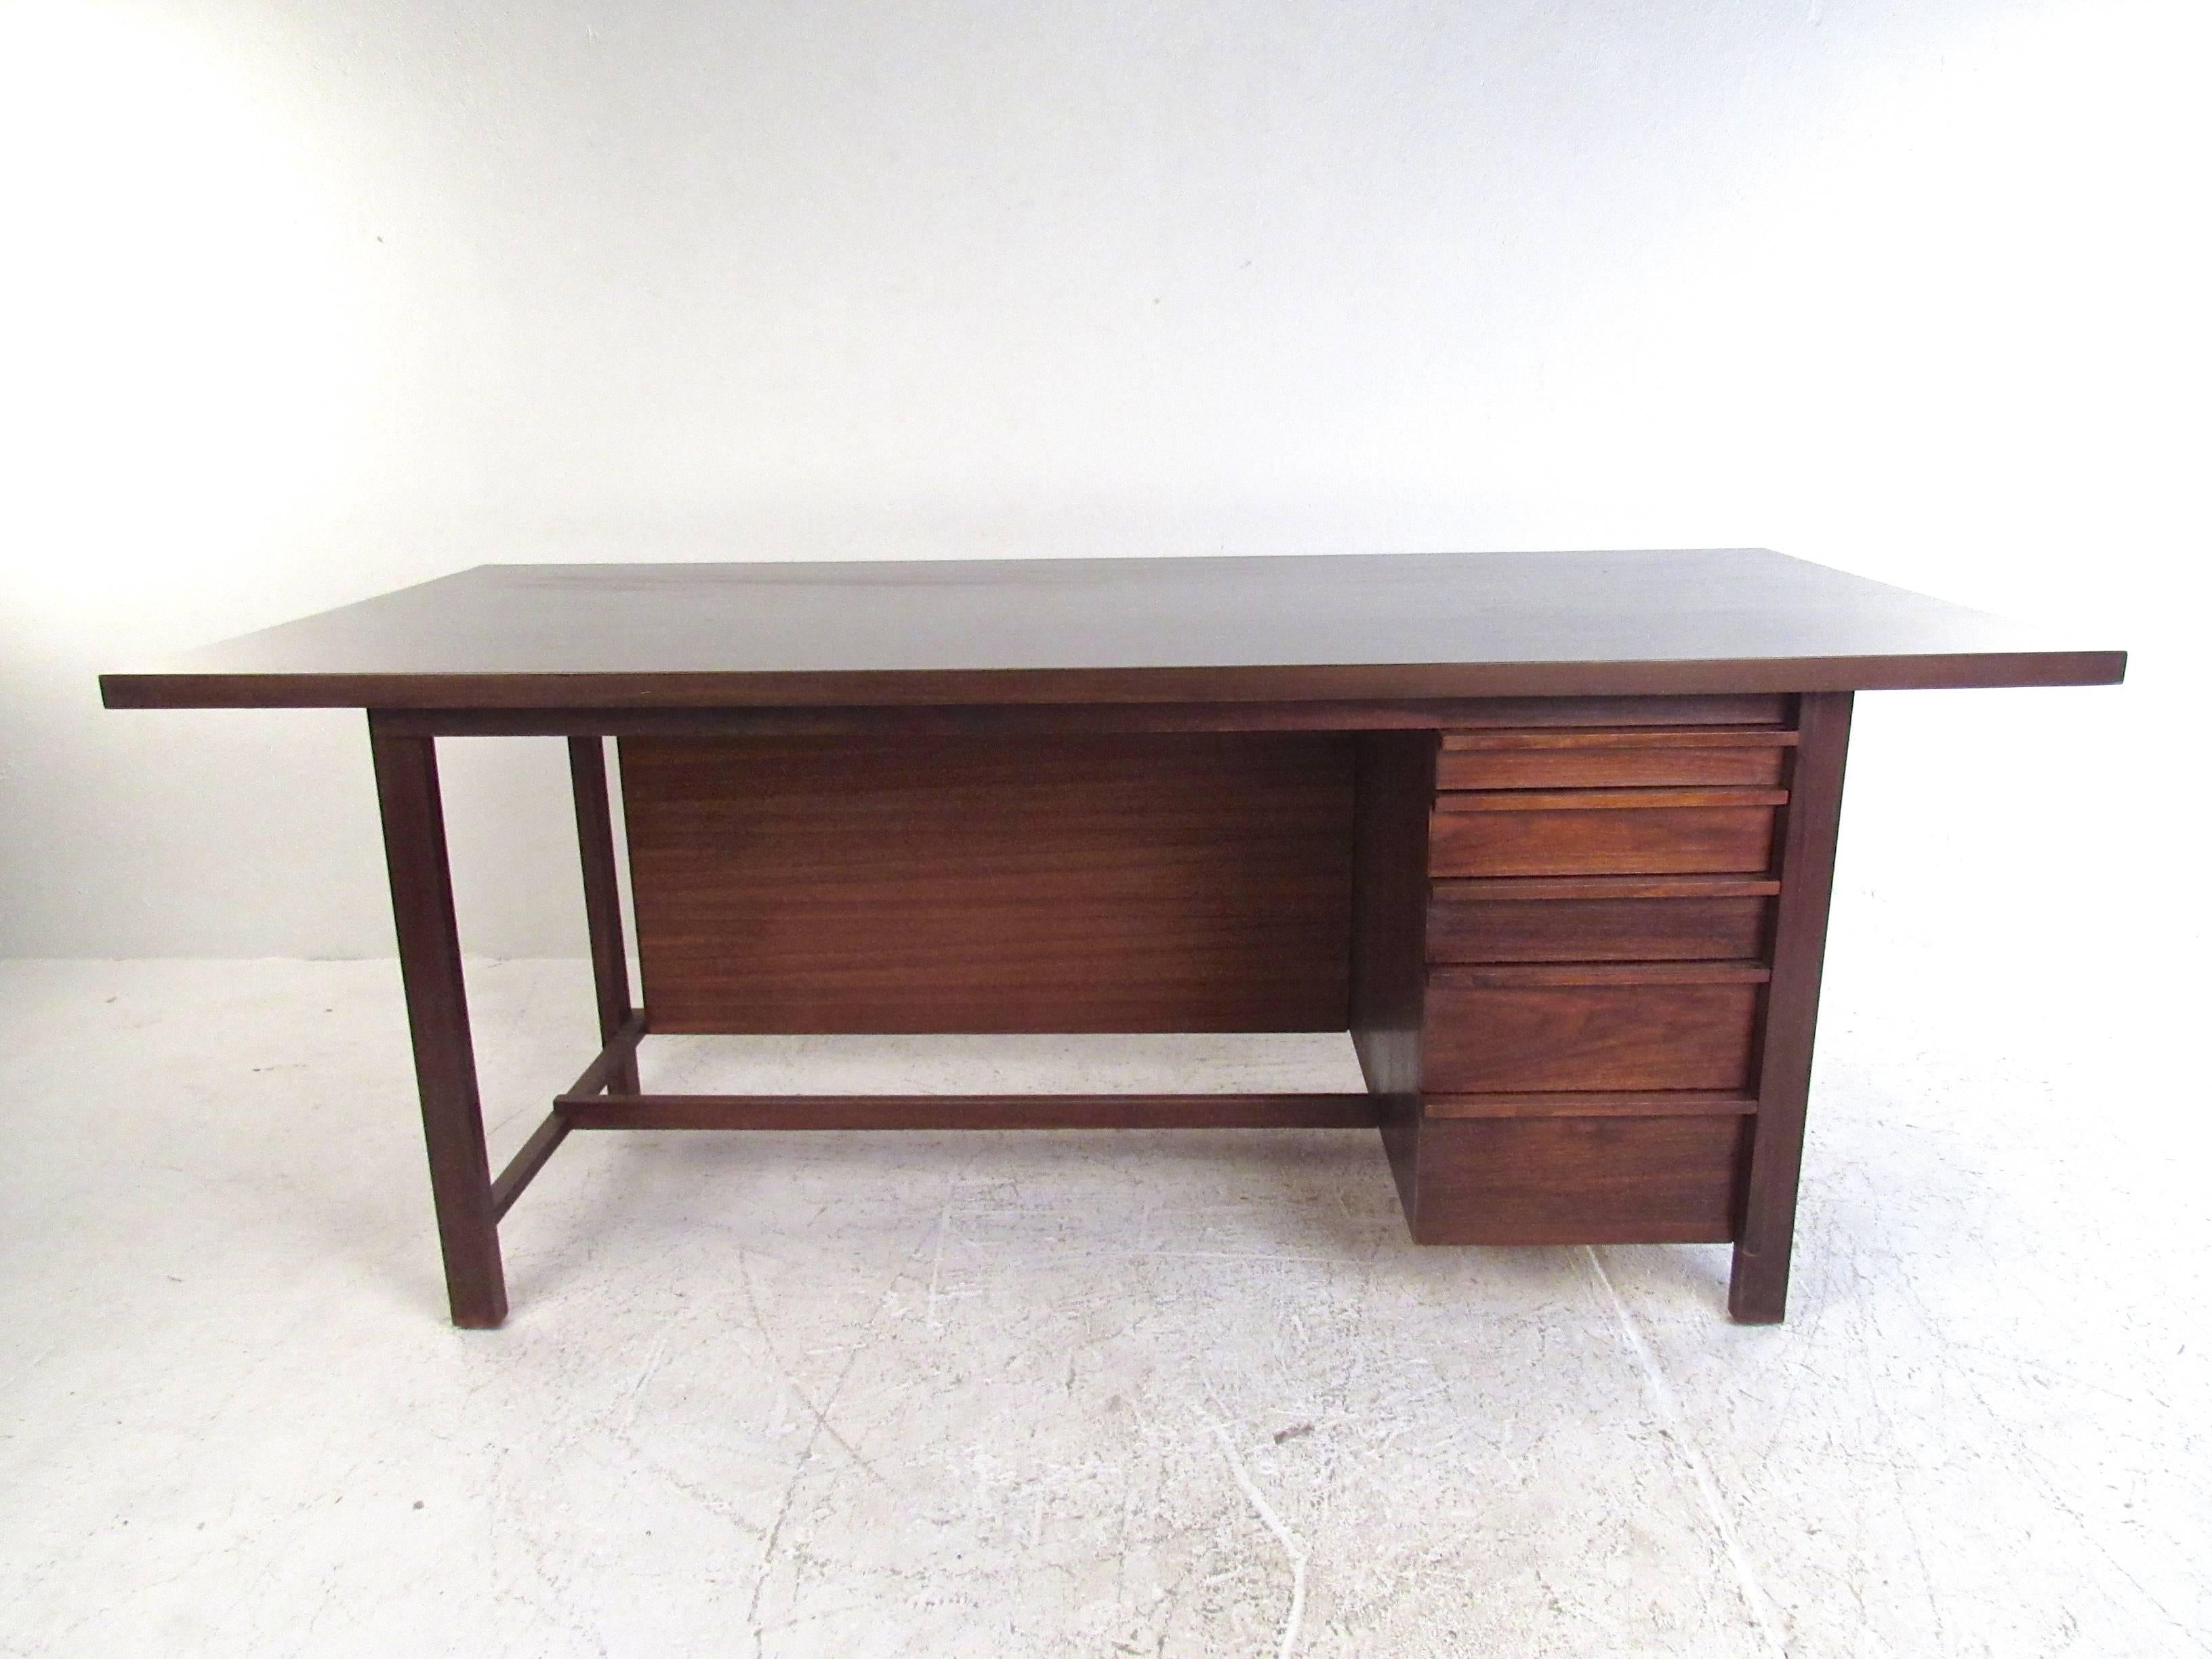 This stunning large-scale executive desk features a spacious worktop with sturdy hardwood frame. Unique Mid-Century Knoll style is wonderfully displayed through carved drawer pulls and unique cane front design. Elegant yet versatile desk for home or